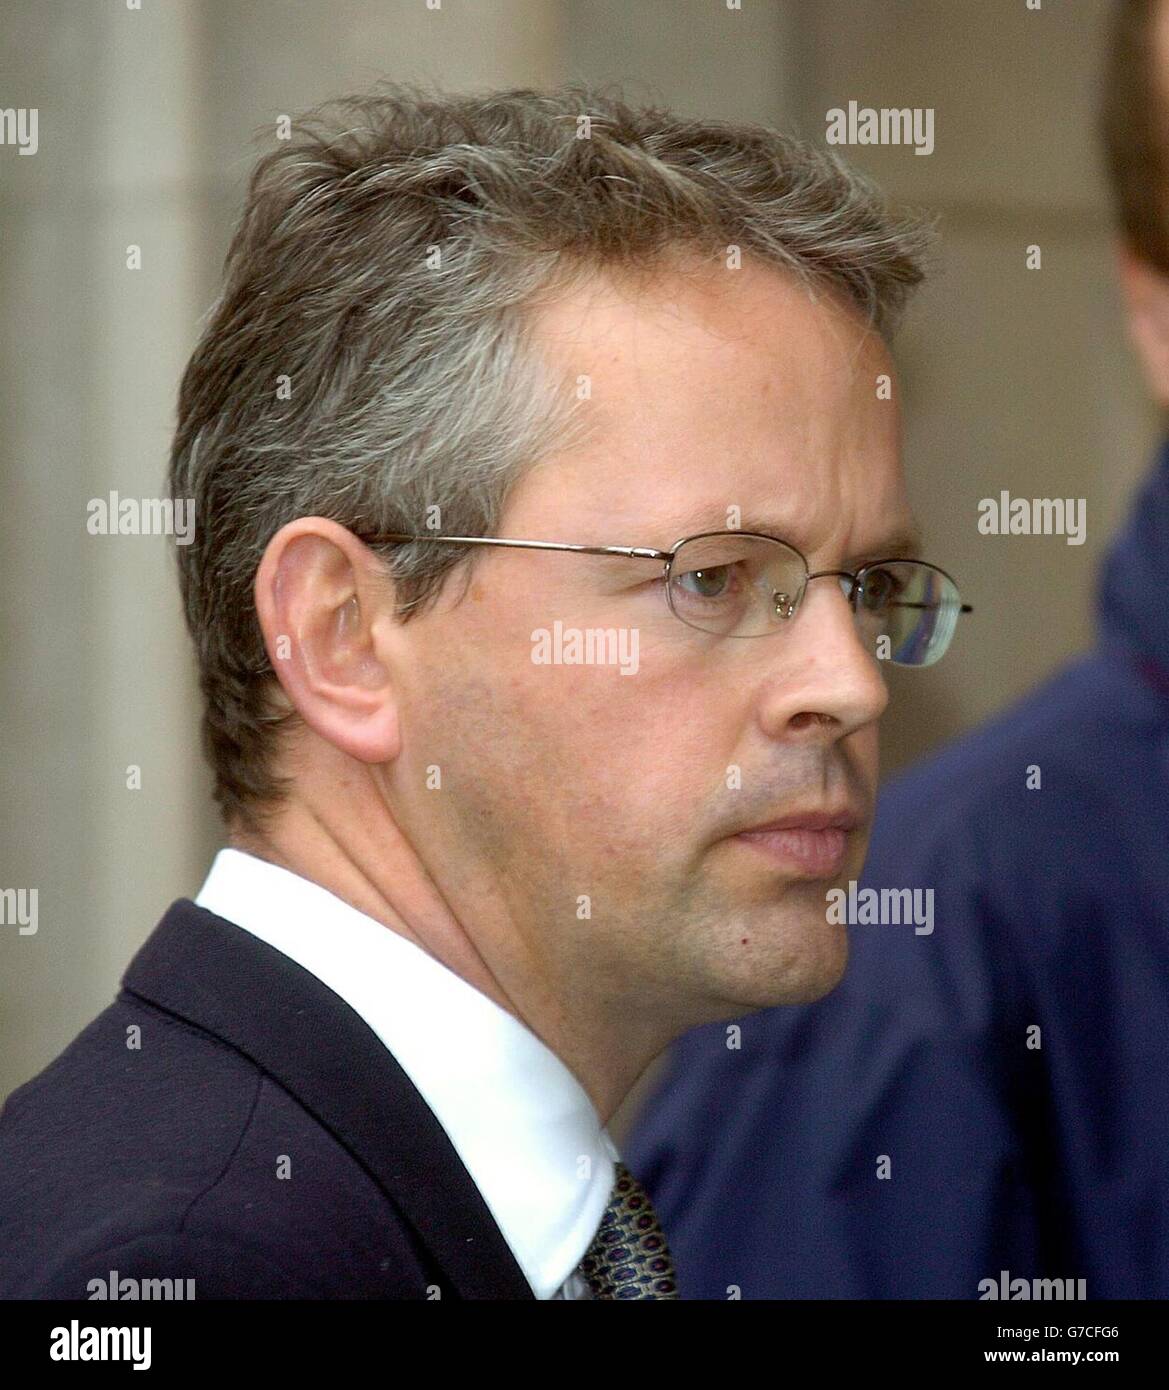 David Bermingham one of three British bankers accused of a million-pound fraud during the Enron scandal at Bow Street magistrates court, to fight against extradition to the United States. A trio of former NatWest investment specialists are alleged to have defrauded a subsidiary of the bank along with two executives from the failed United States energy giant. 15/10/2004 David Bermingham one of three British bankers accused of a multi-million pound fraud involving Enron officials who should be tried in the United States, a court ruled Friday 15 October 2004. The three men - David Bermingham, Stock Photo